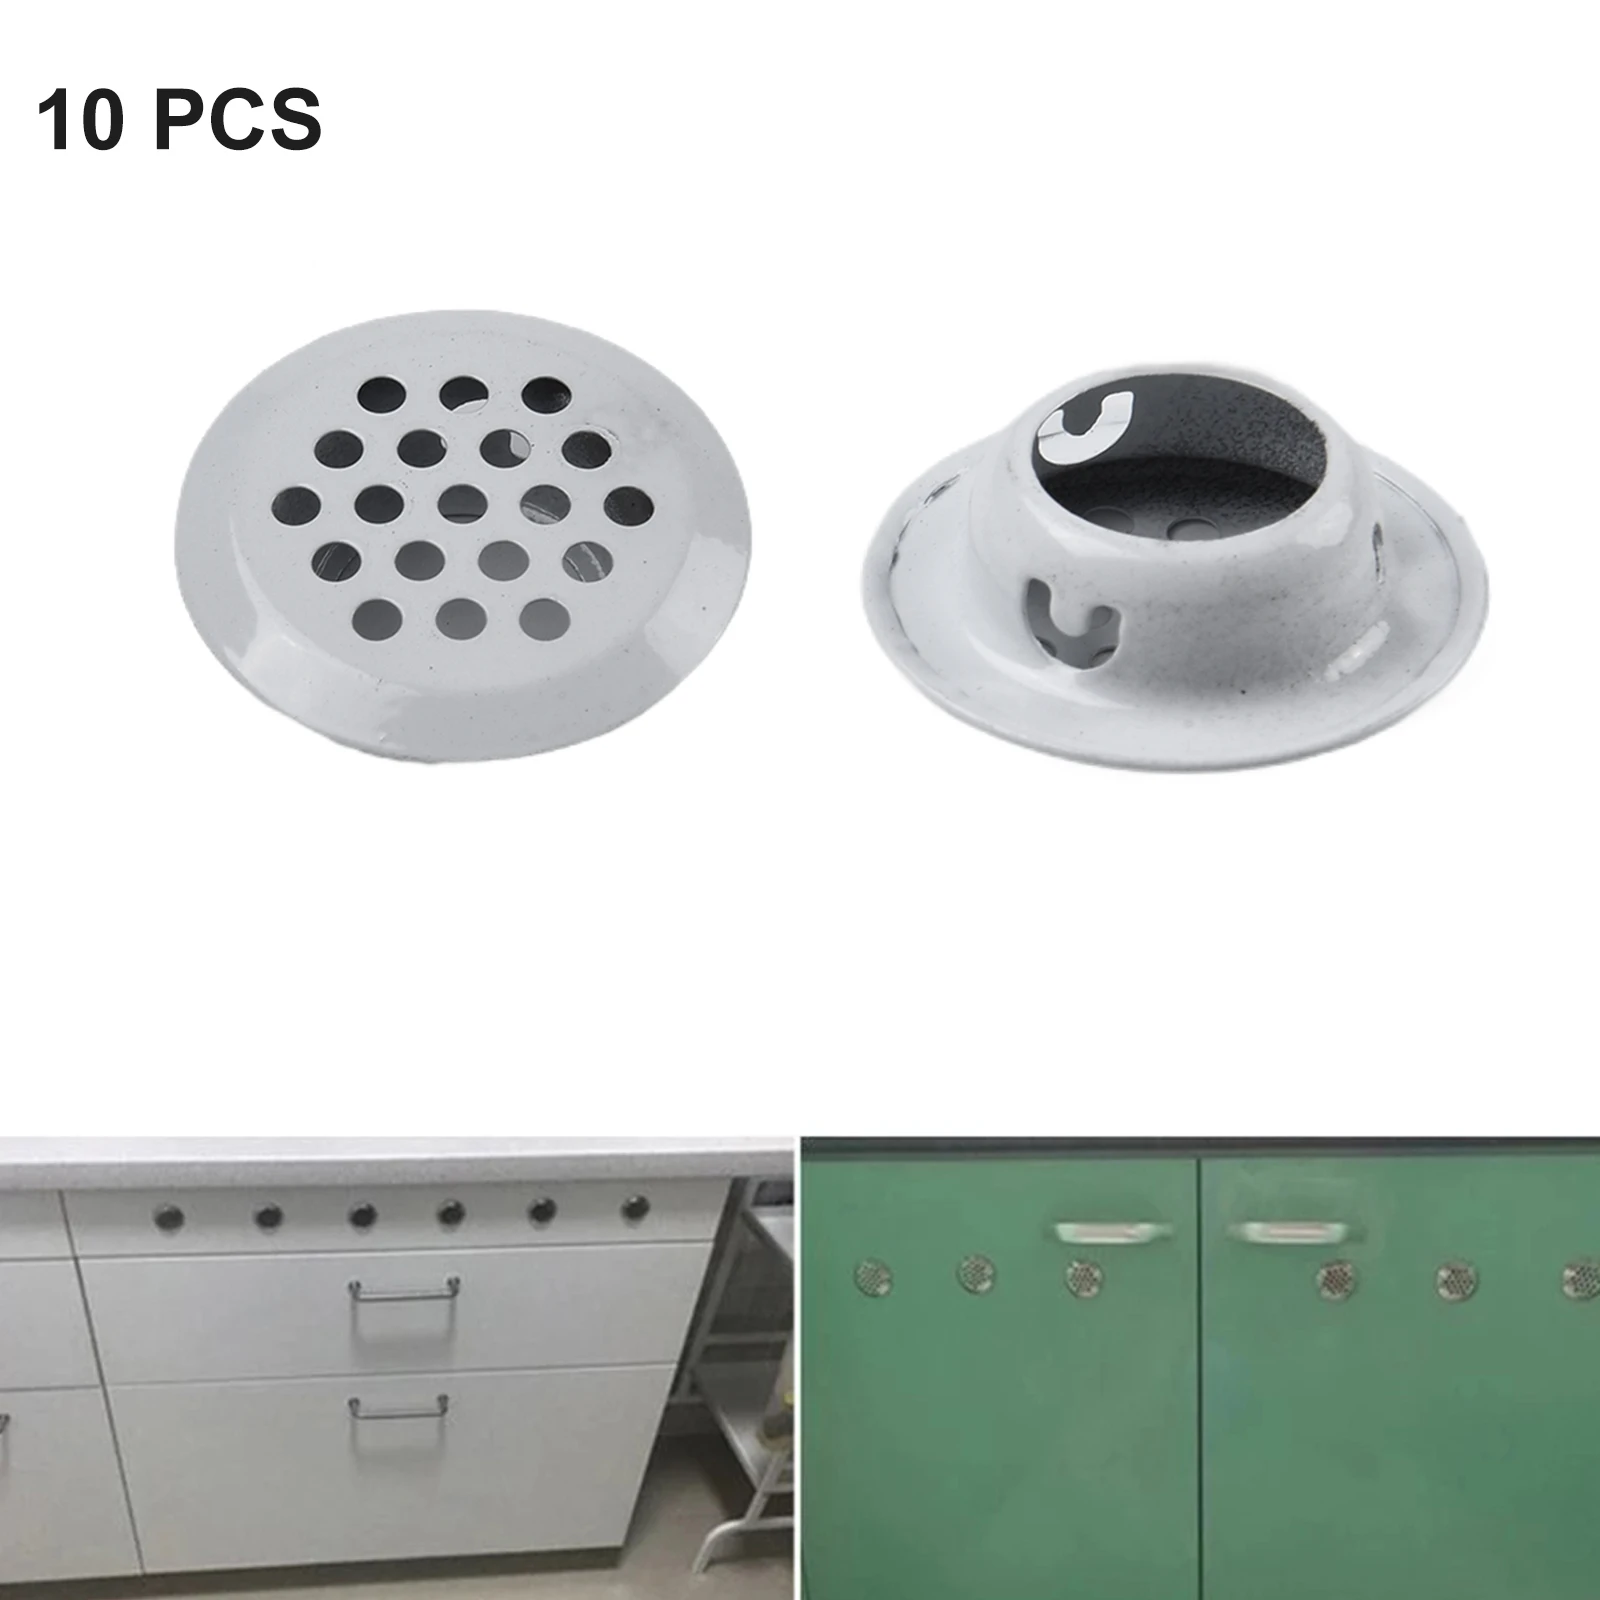 

Bevel Round Mesh Holes Metal Cabinet Cupboard Cabinet Cupboard Ducting Ventilation Grill Cover Home Modern Touch